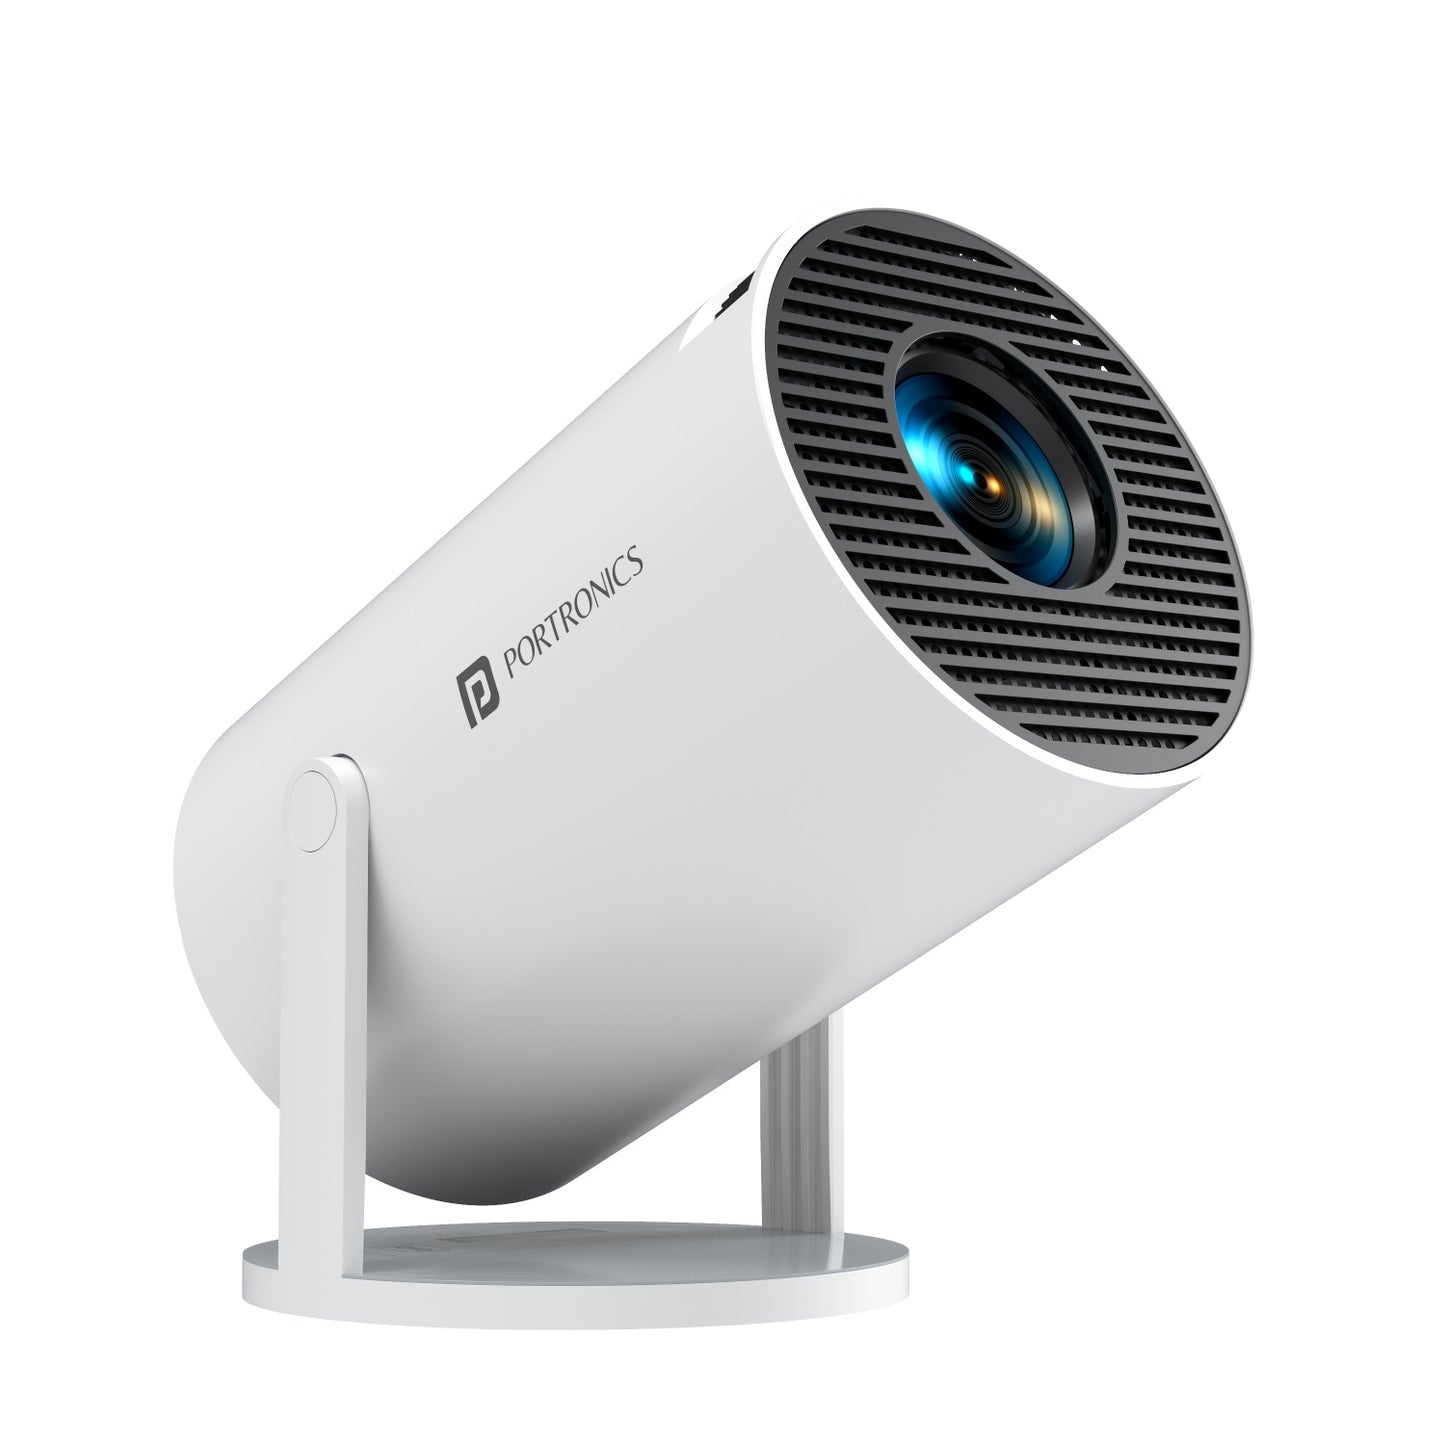 Portronics Beem 440 Portable Bluetooth Projector with 270 degree| Smart LED home projector built in adjustable stand| smart portable projector at best price